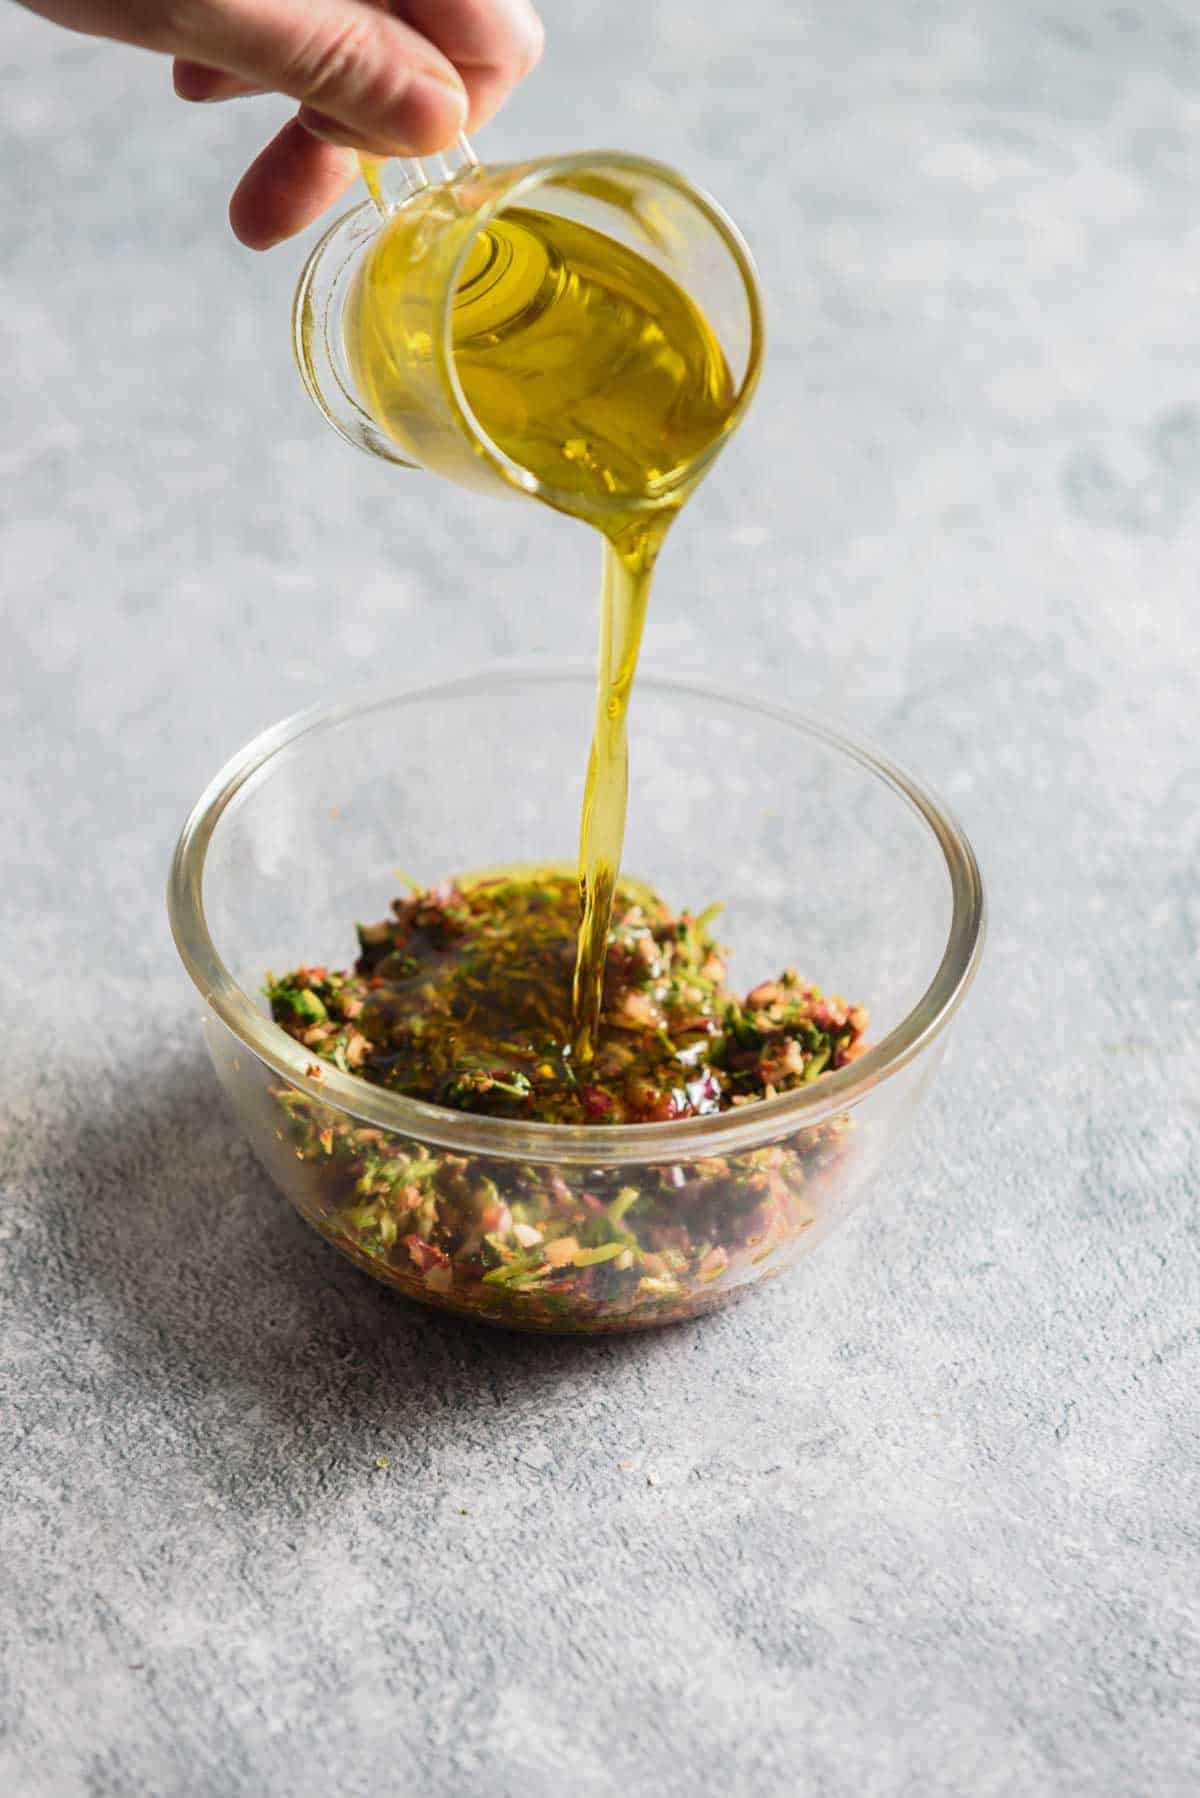 olive oil being poured into a bowl with herbs and spices